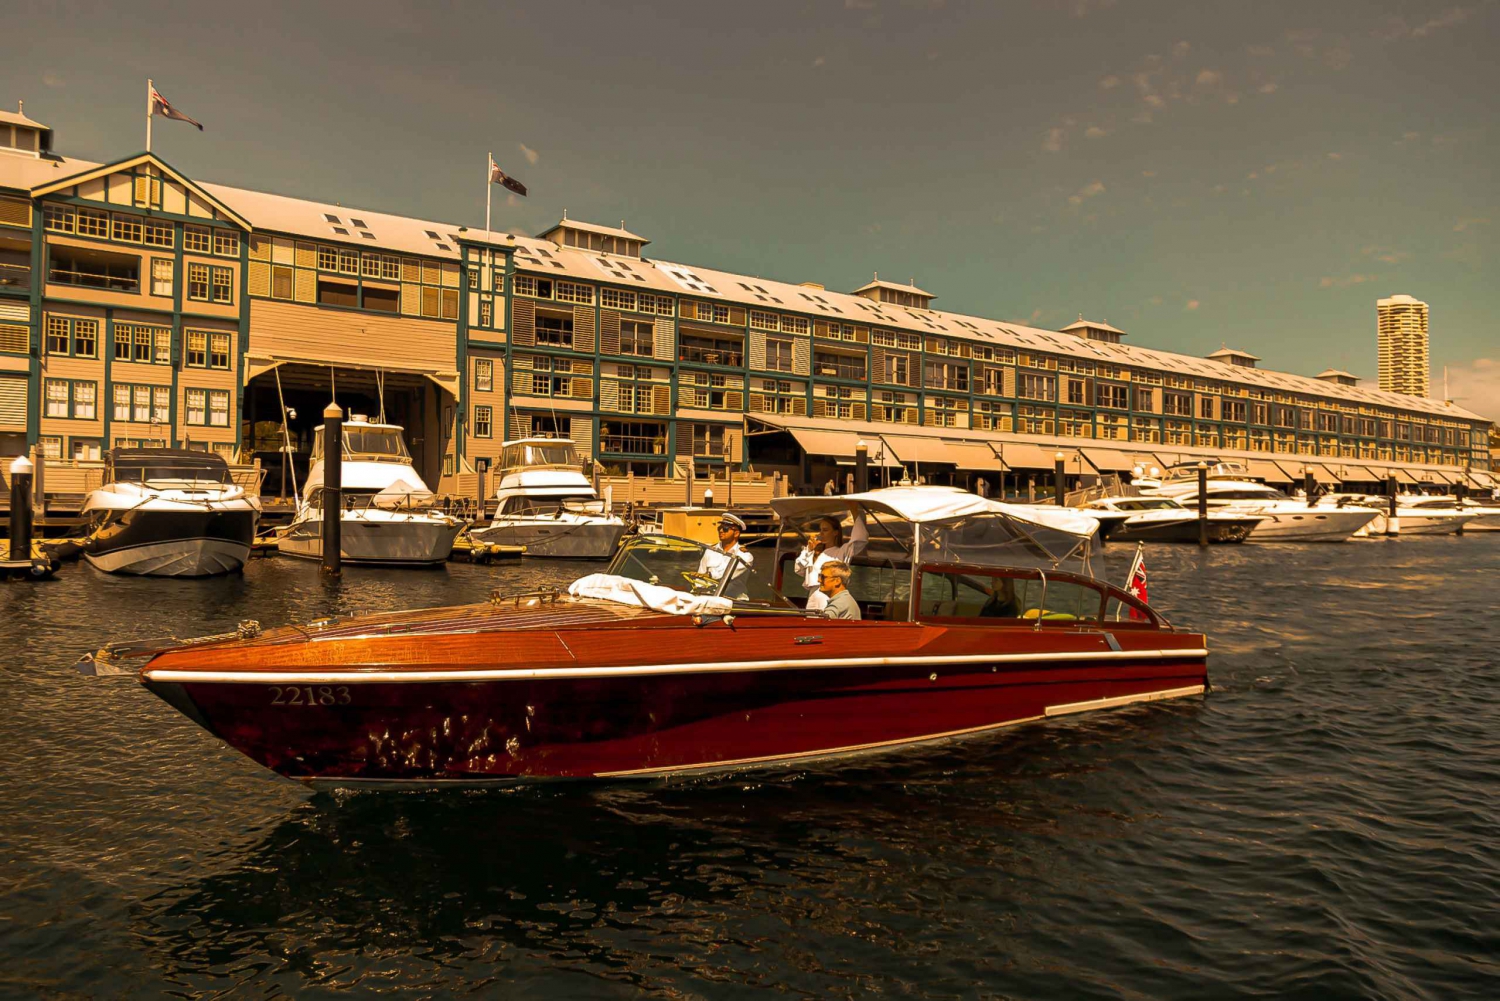 Sydney: Private Sunset Cruise with Wine for up to 6 guests